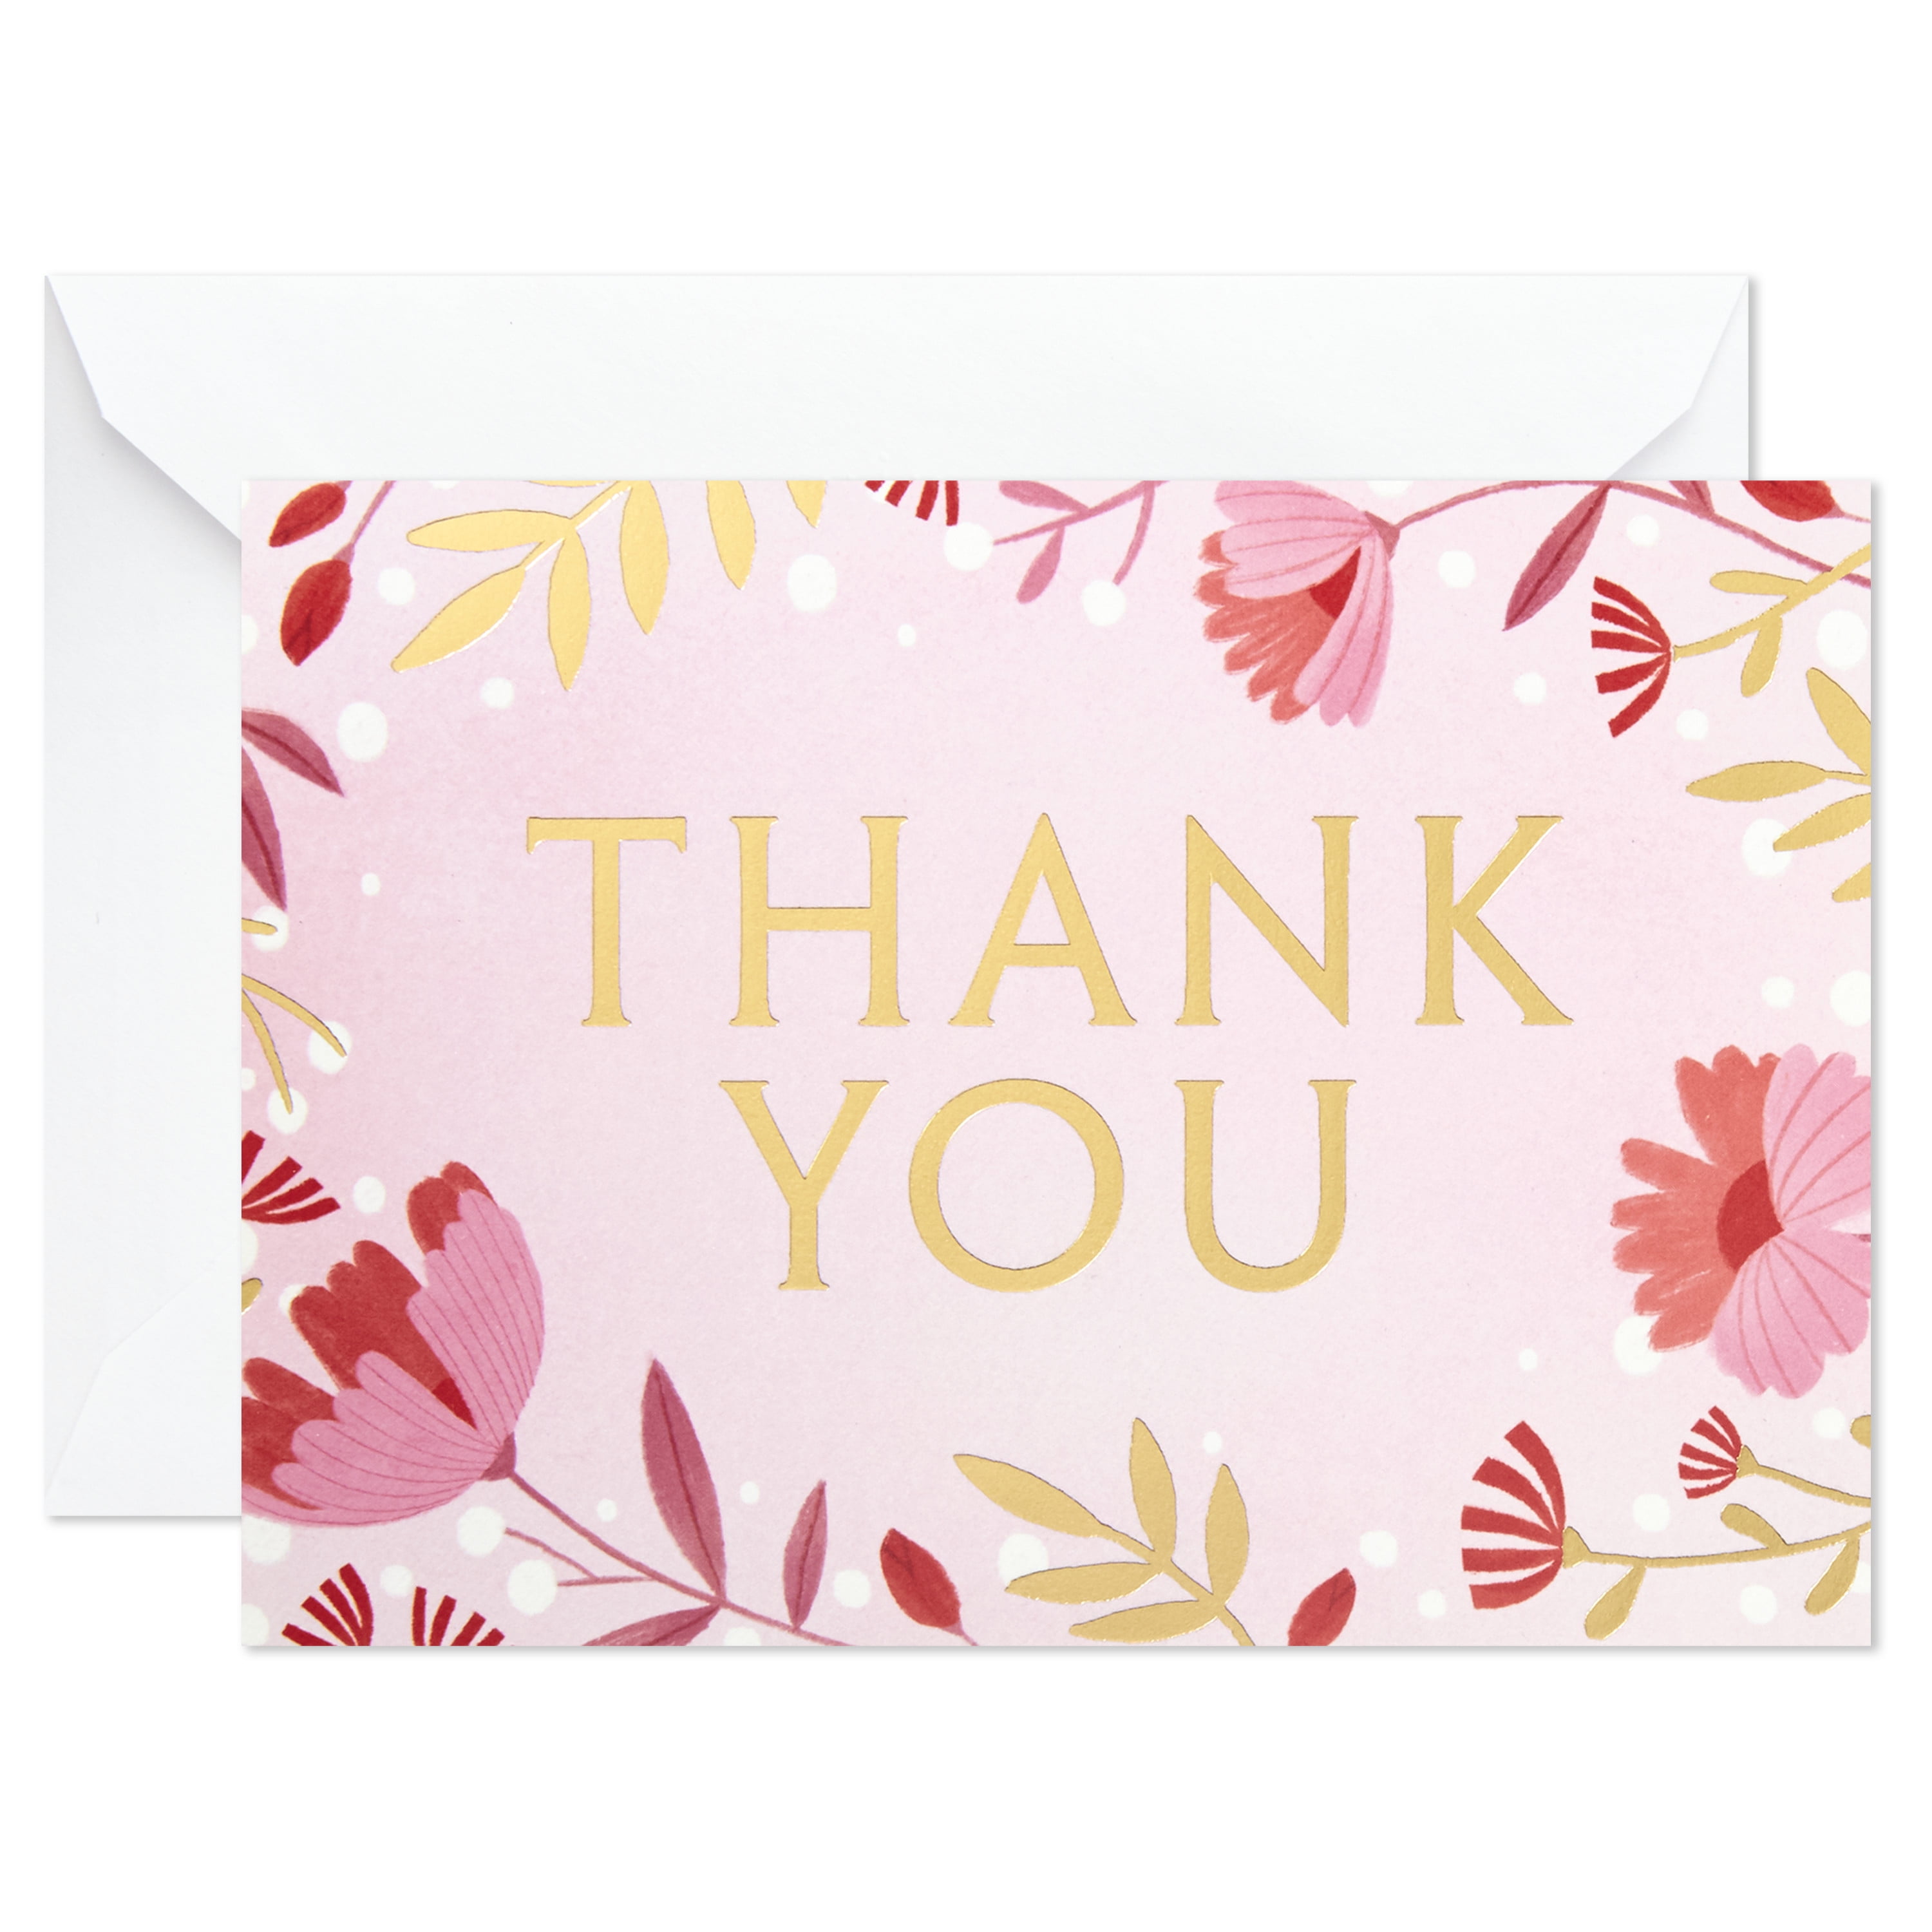 Hallmark Blank Thank-You Notes, Pink Floral, 40 ct.